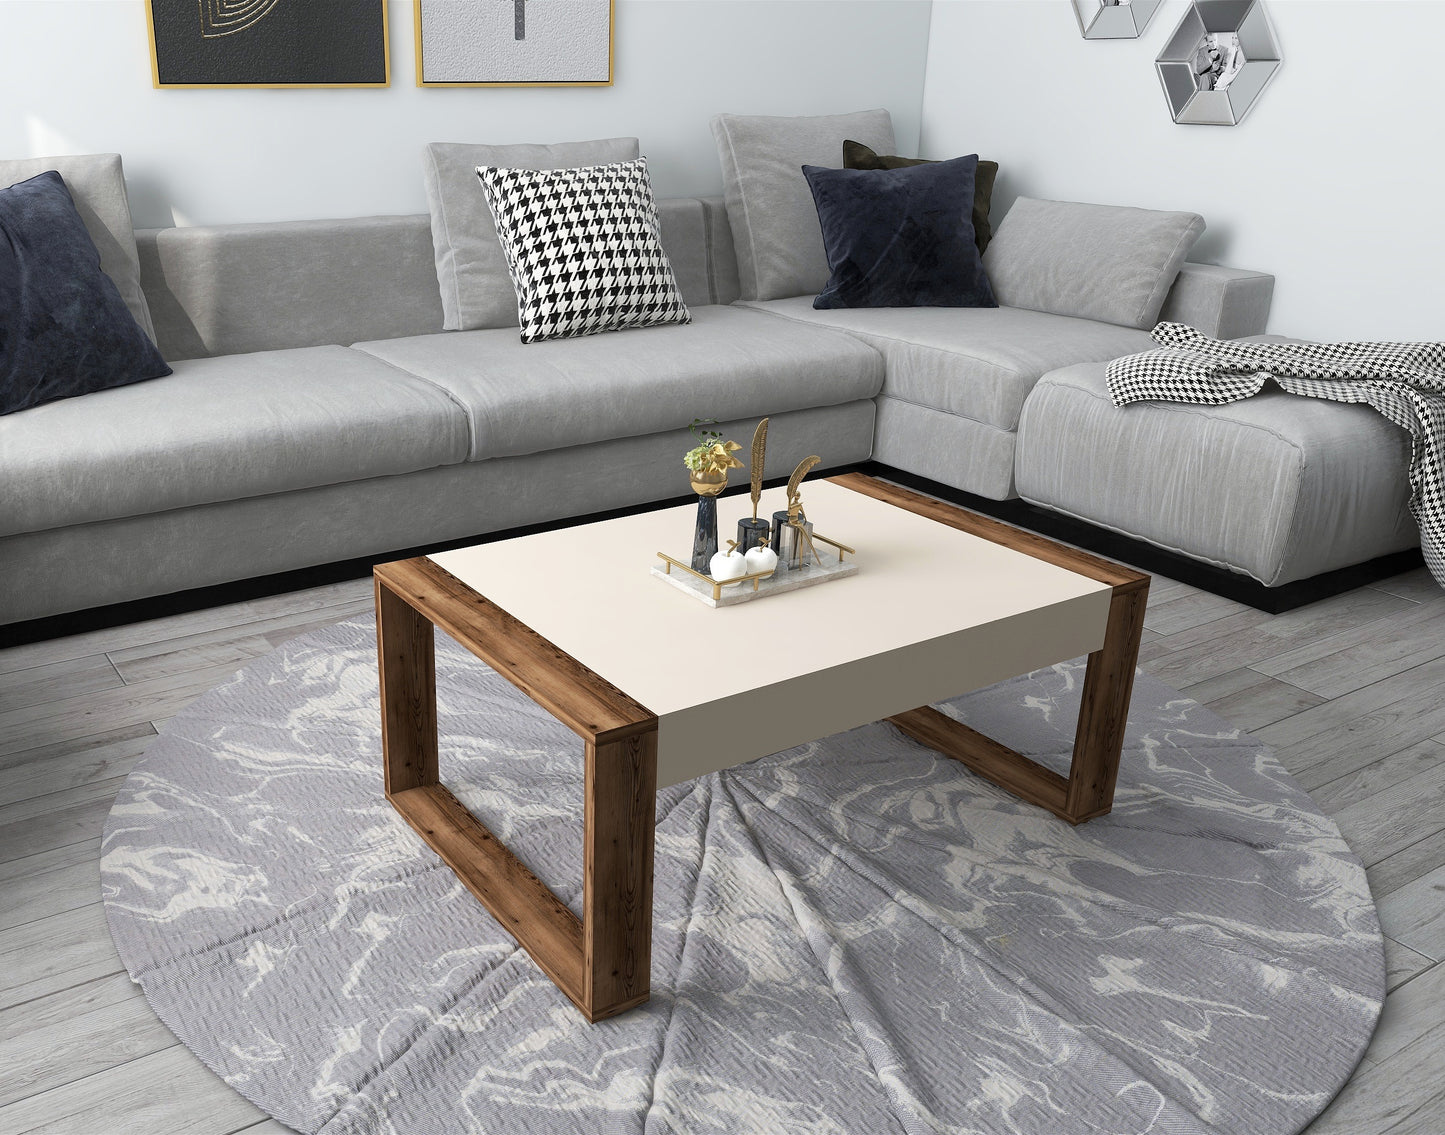 low table, coffee table, cocktail table, accent table, coffee table decor, coffee table styling